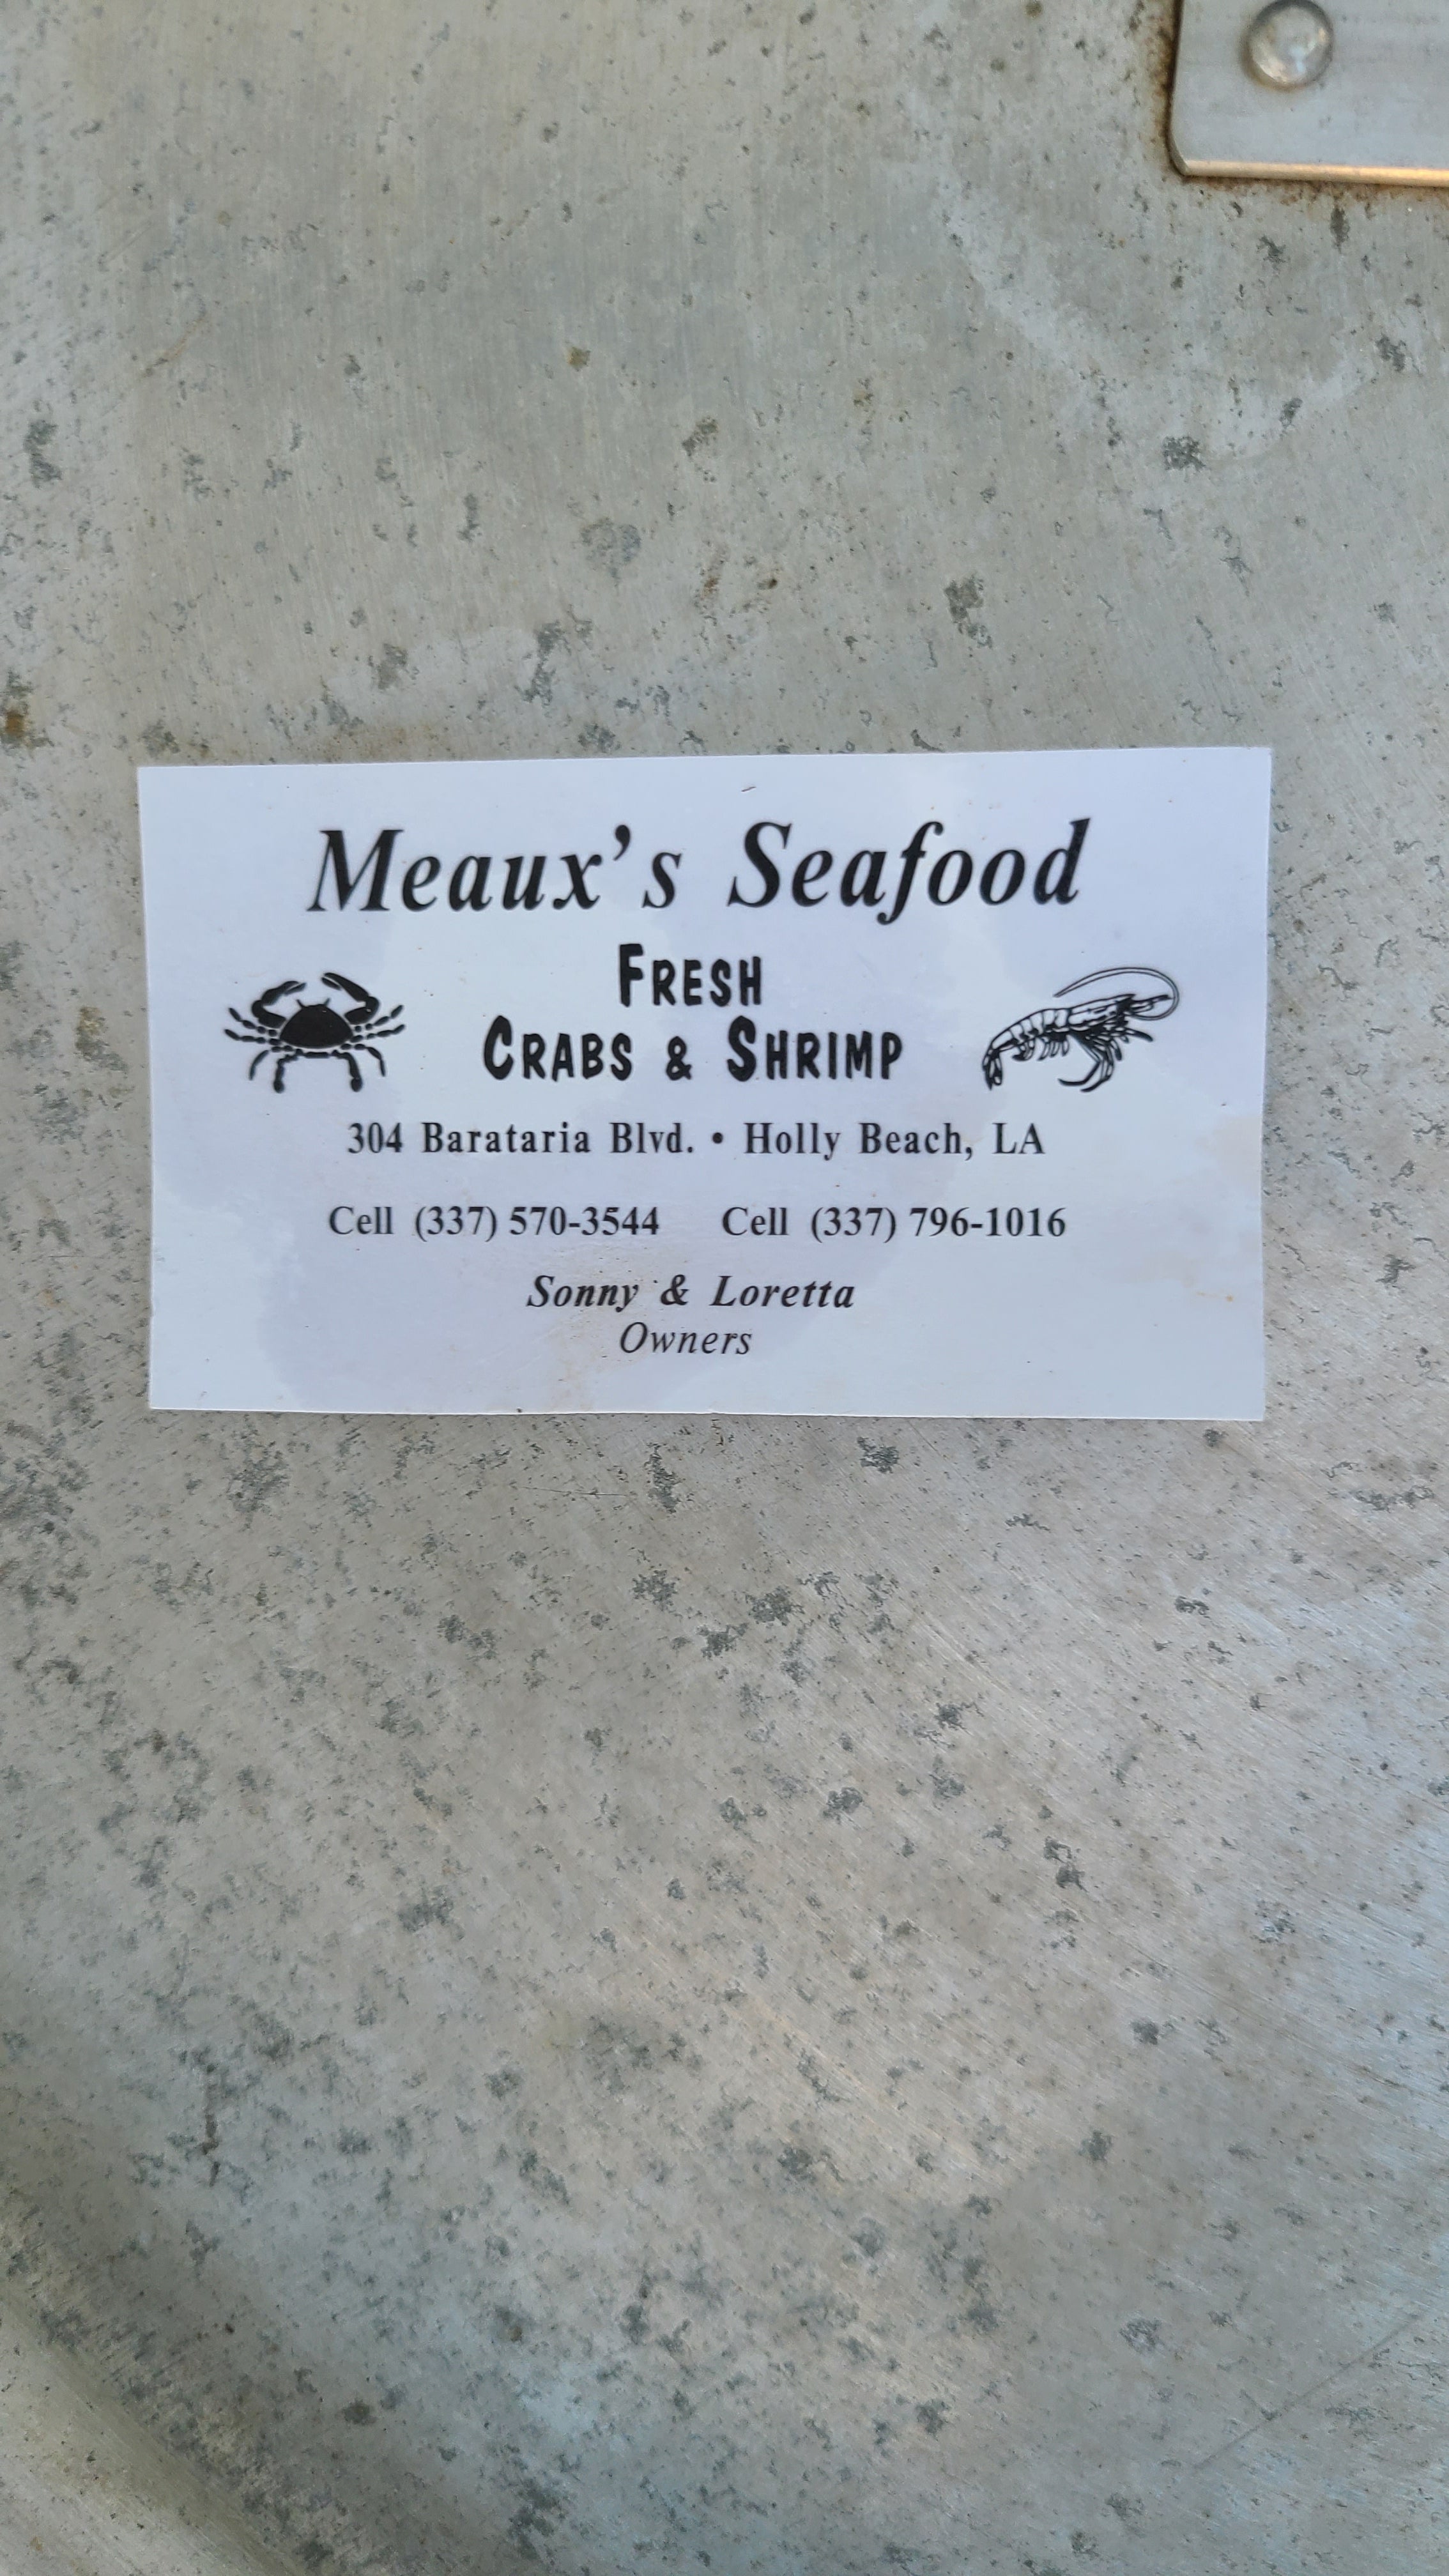 Awesome seafood less than 2 blocks,  also has bait